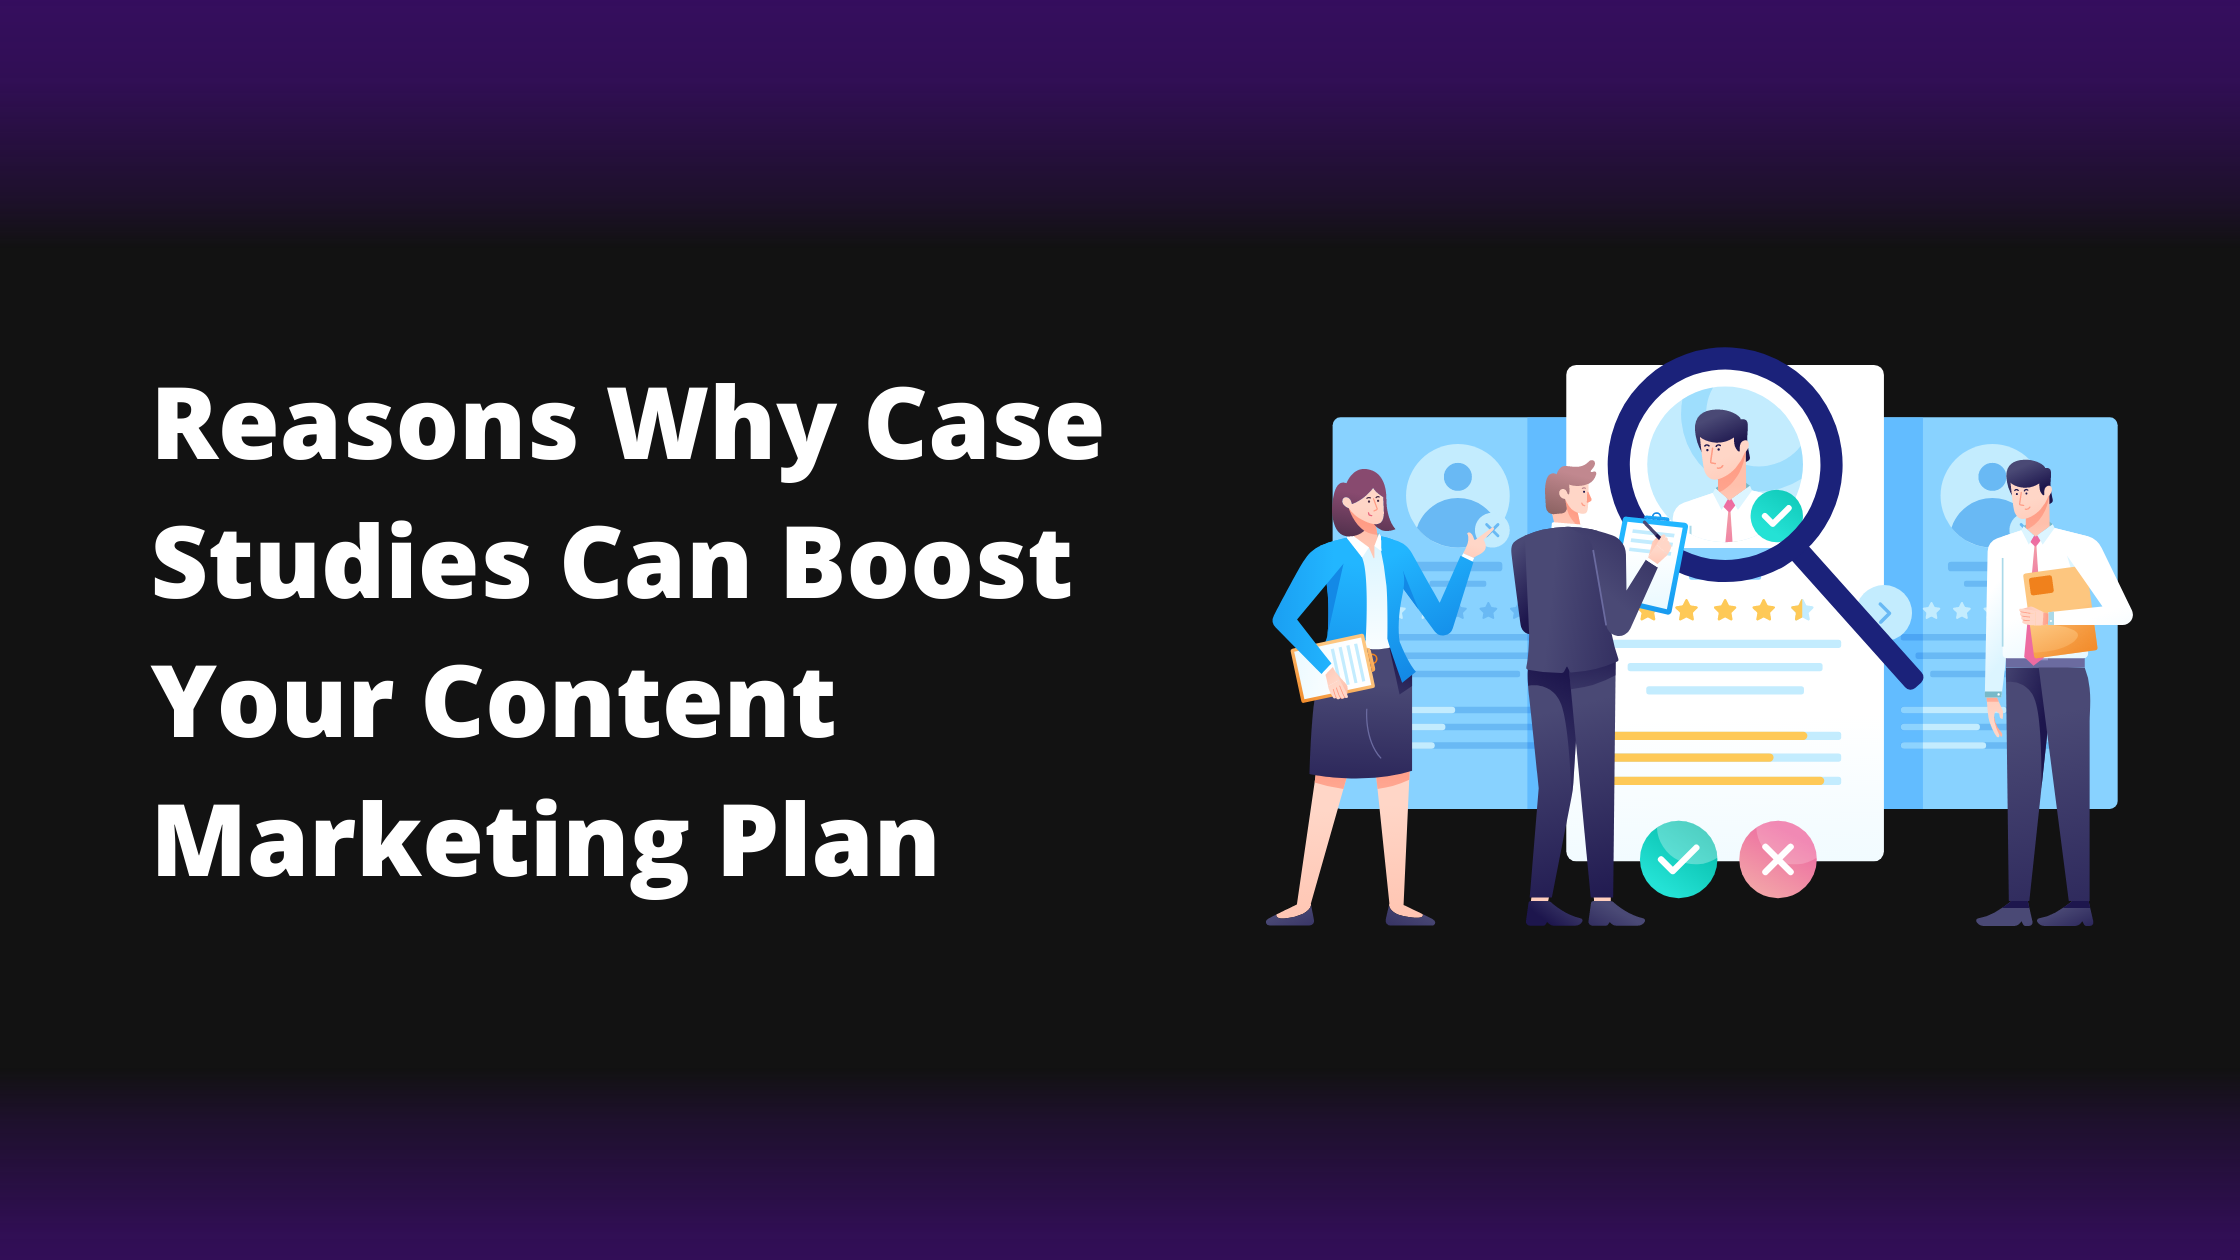 Reasons why case studies can boost your content marketing plan